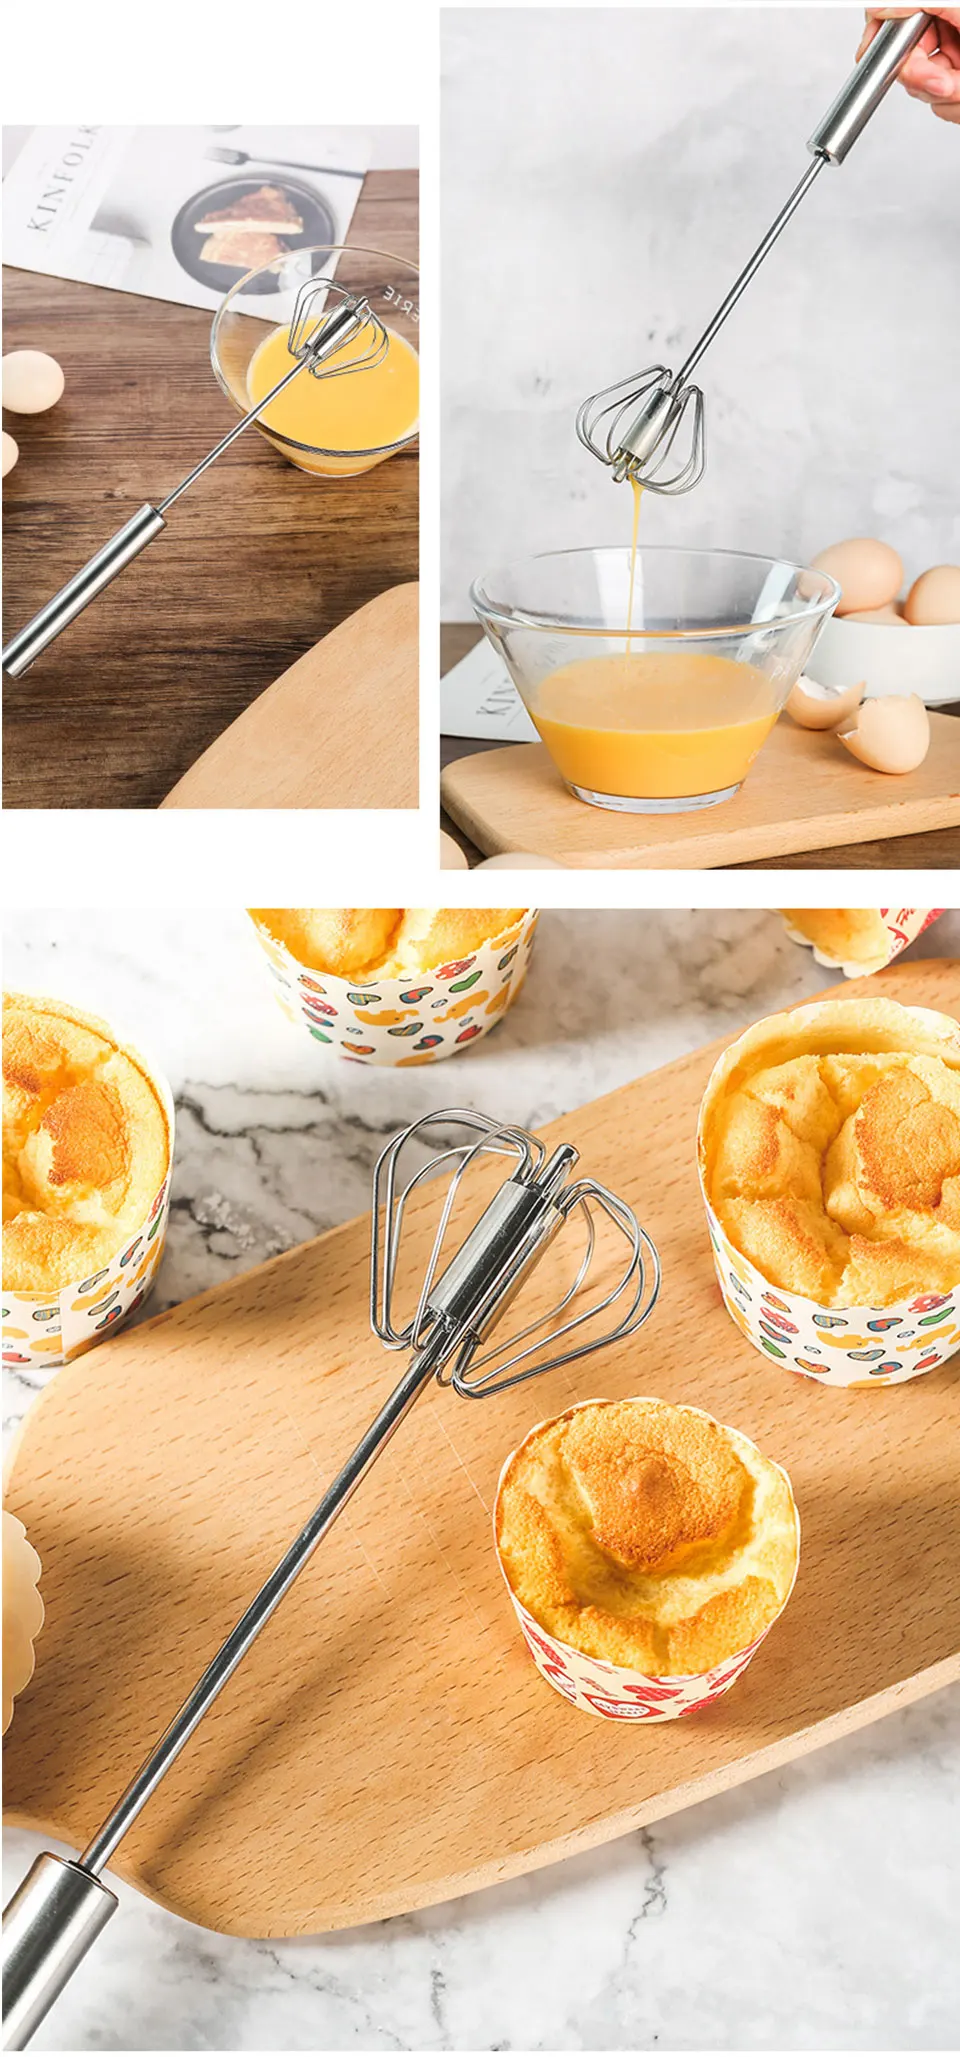 Semi-automatic Egg Beater 304 Stainless Steel Whisk Manual Hand Mixer Self Turning Stirrer Kitchen Accessories Egg Tools